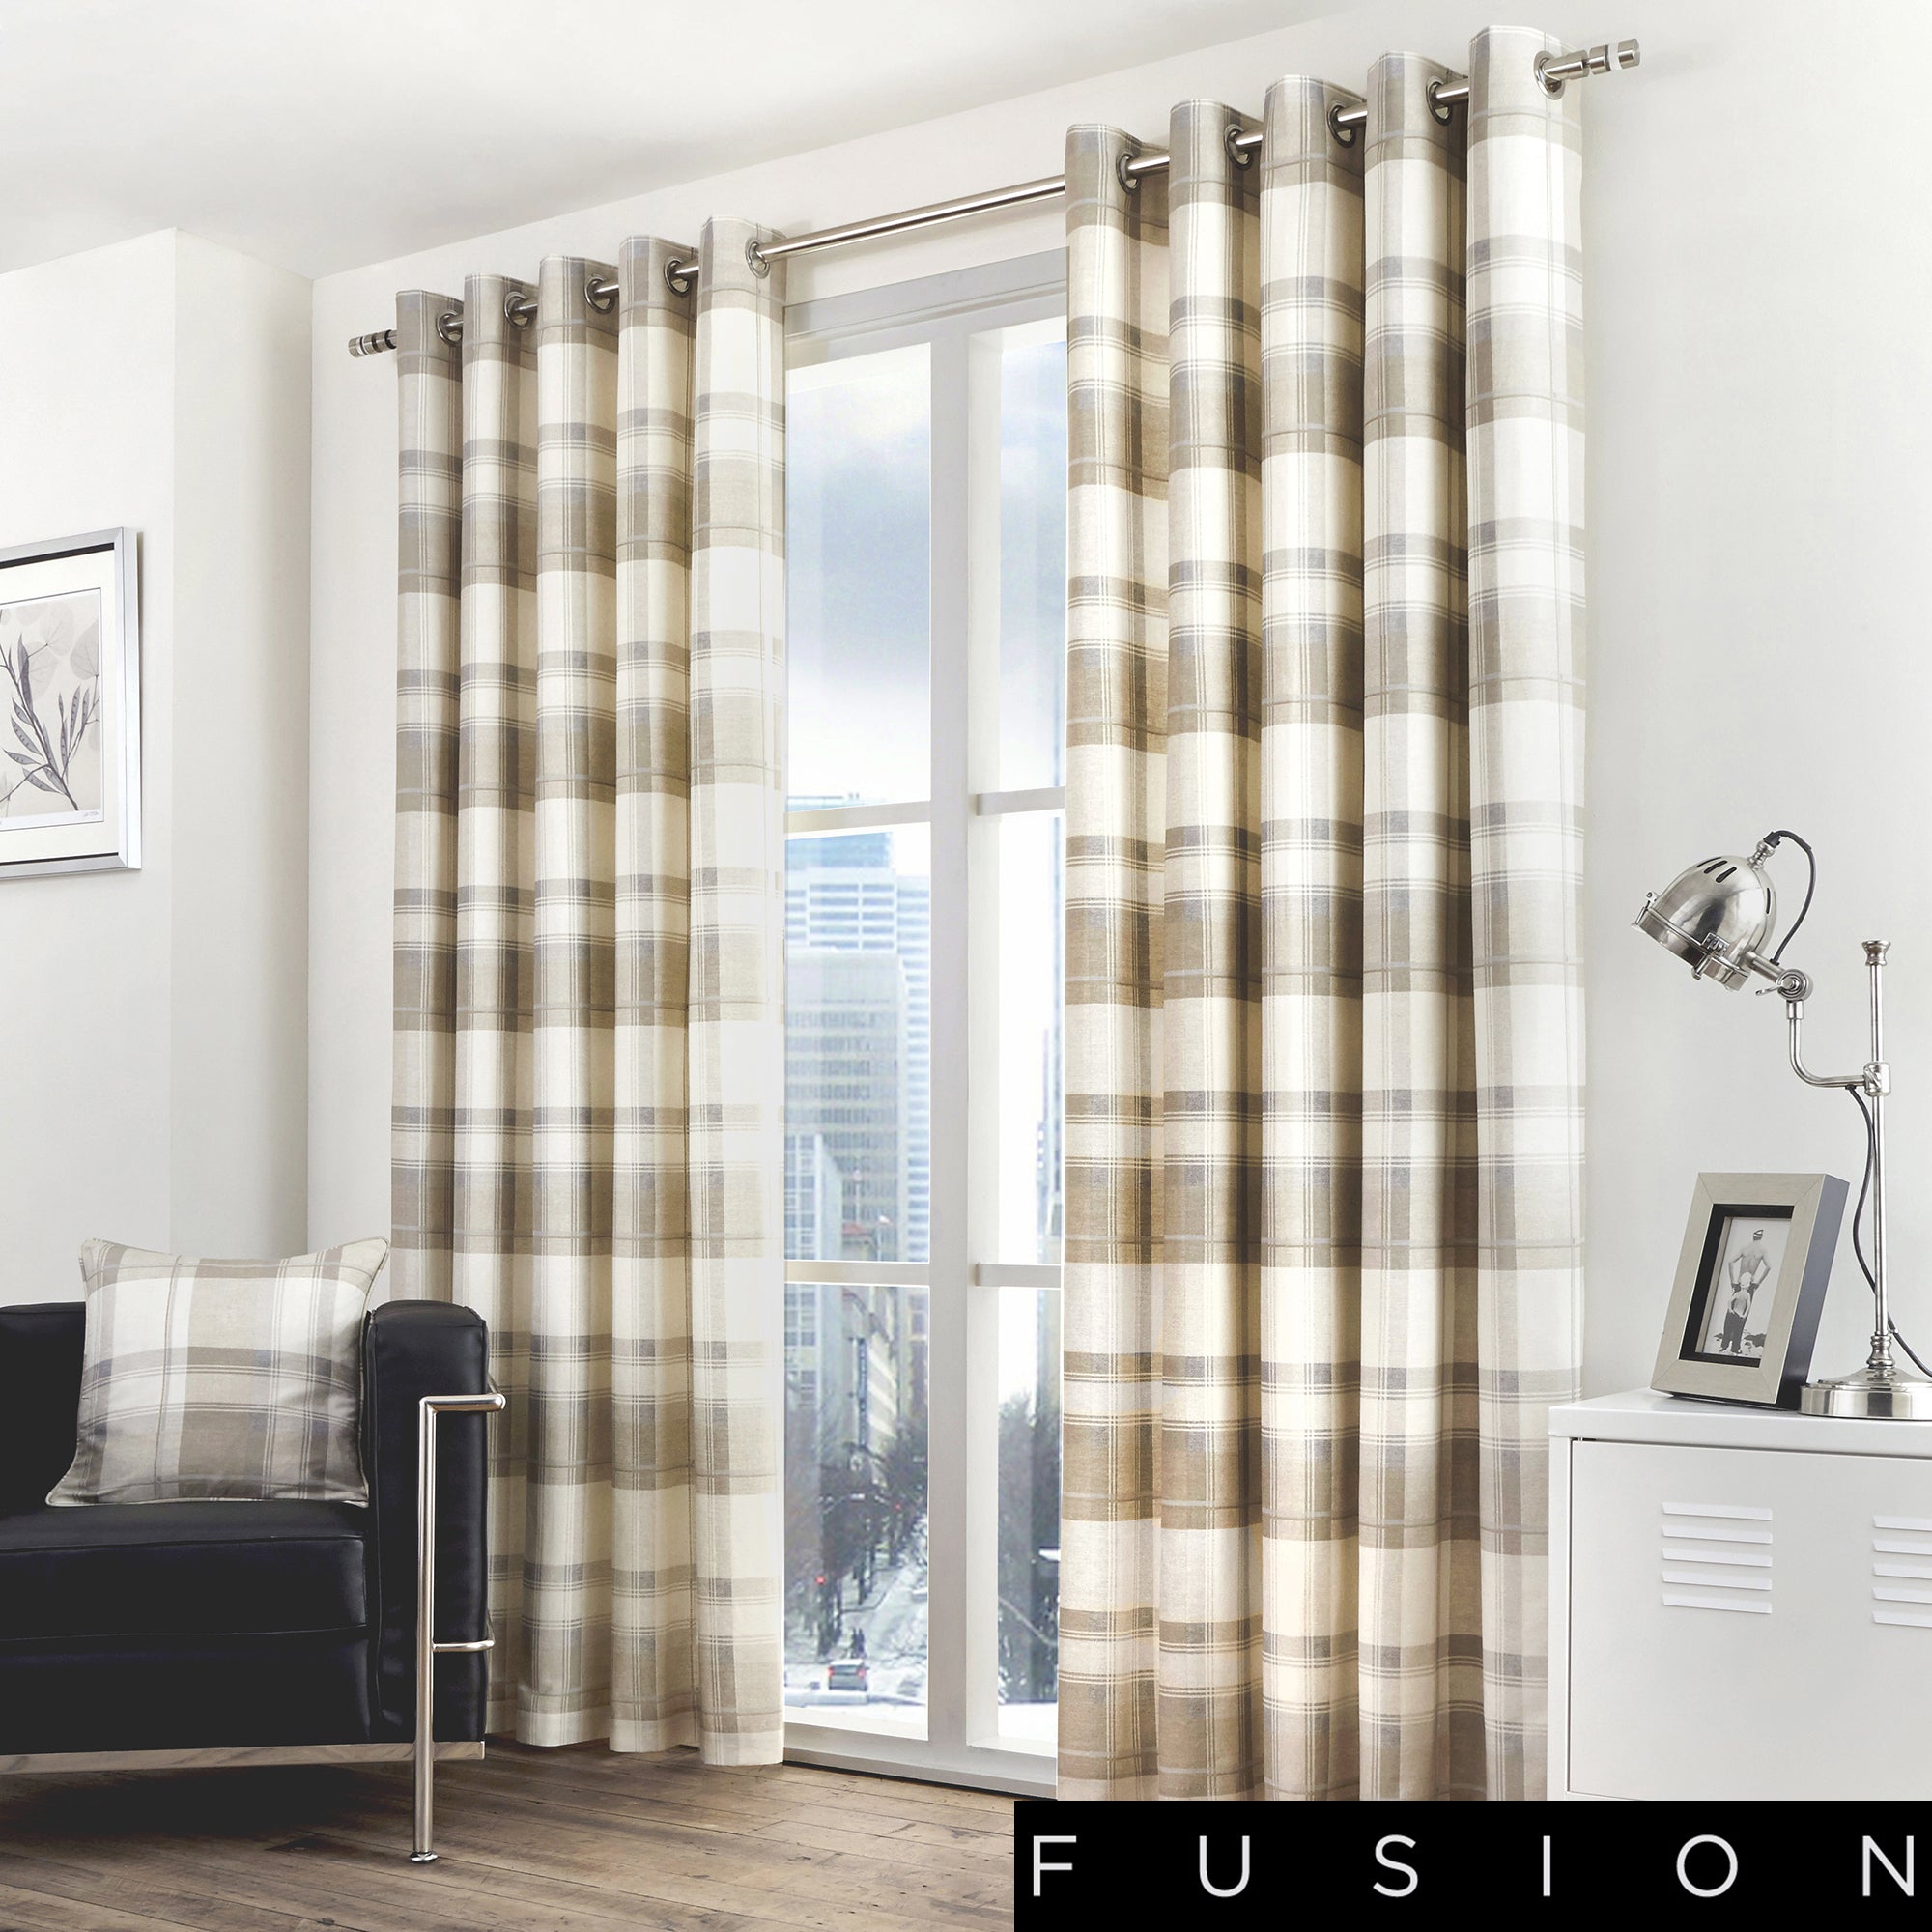 Balmoral Check - 100% Cotton Lined Eyelet Curtains in Natural - by Fusion